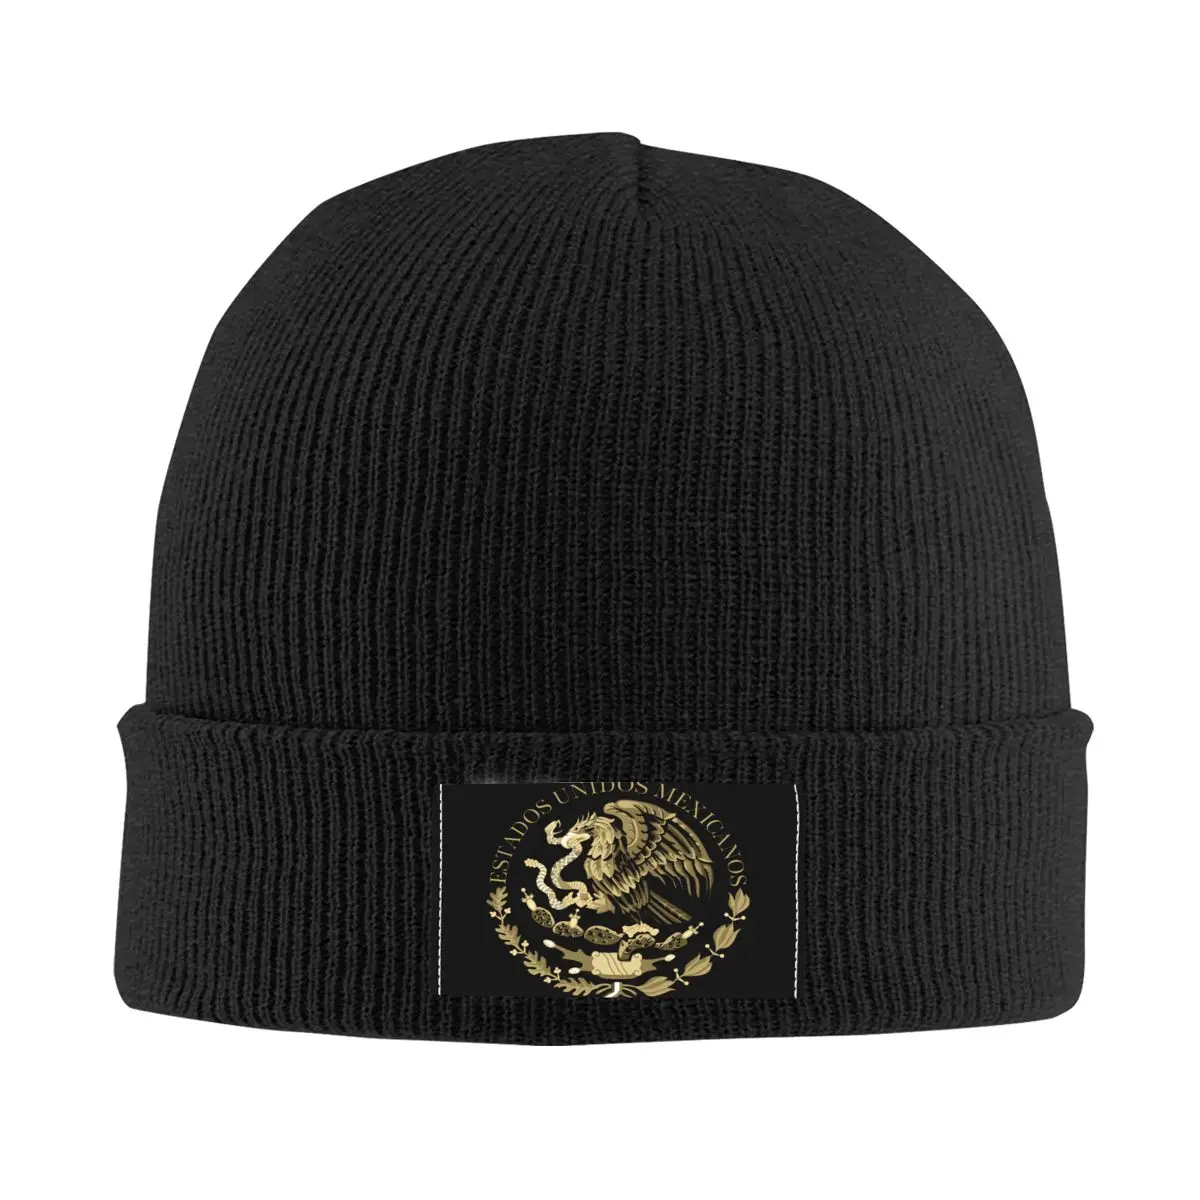 

Coat Of Arms Of Mexico Skullies Beanies Caps Unisex Hip Hop Winter Warm Knit Hat Adult Mexican Flag Seal In Sepia Bonnet Hats